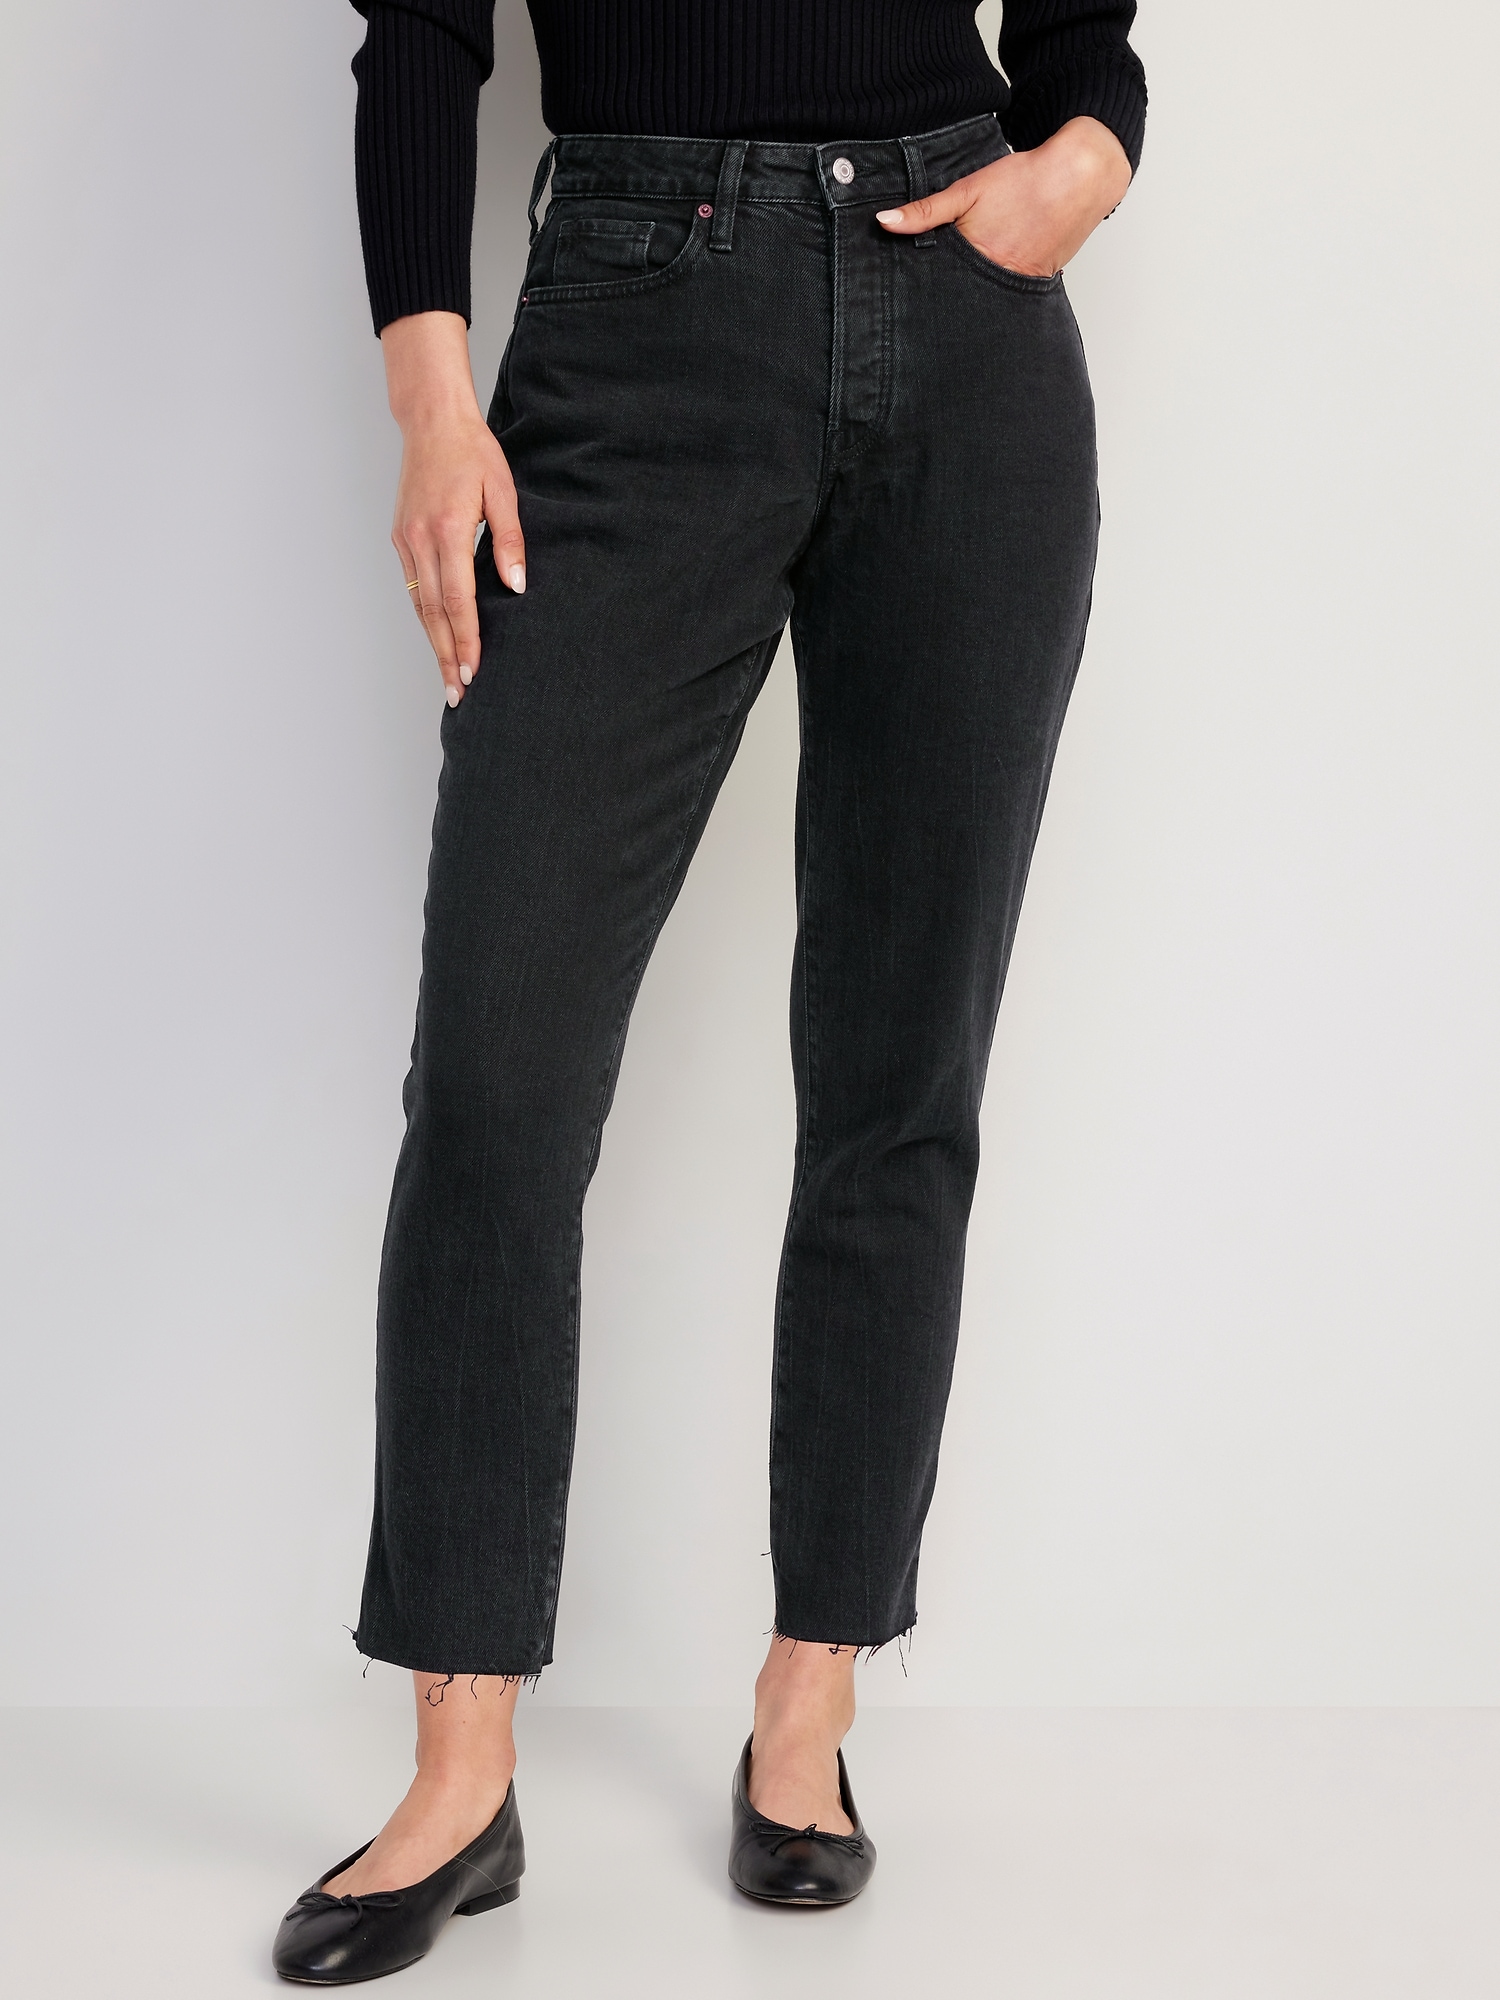 Old Navy Solid Black Jeans Size 14 - 44% off